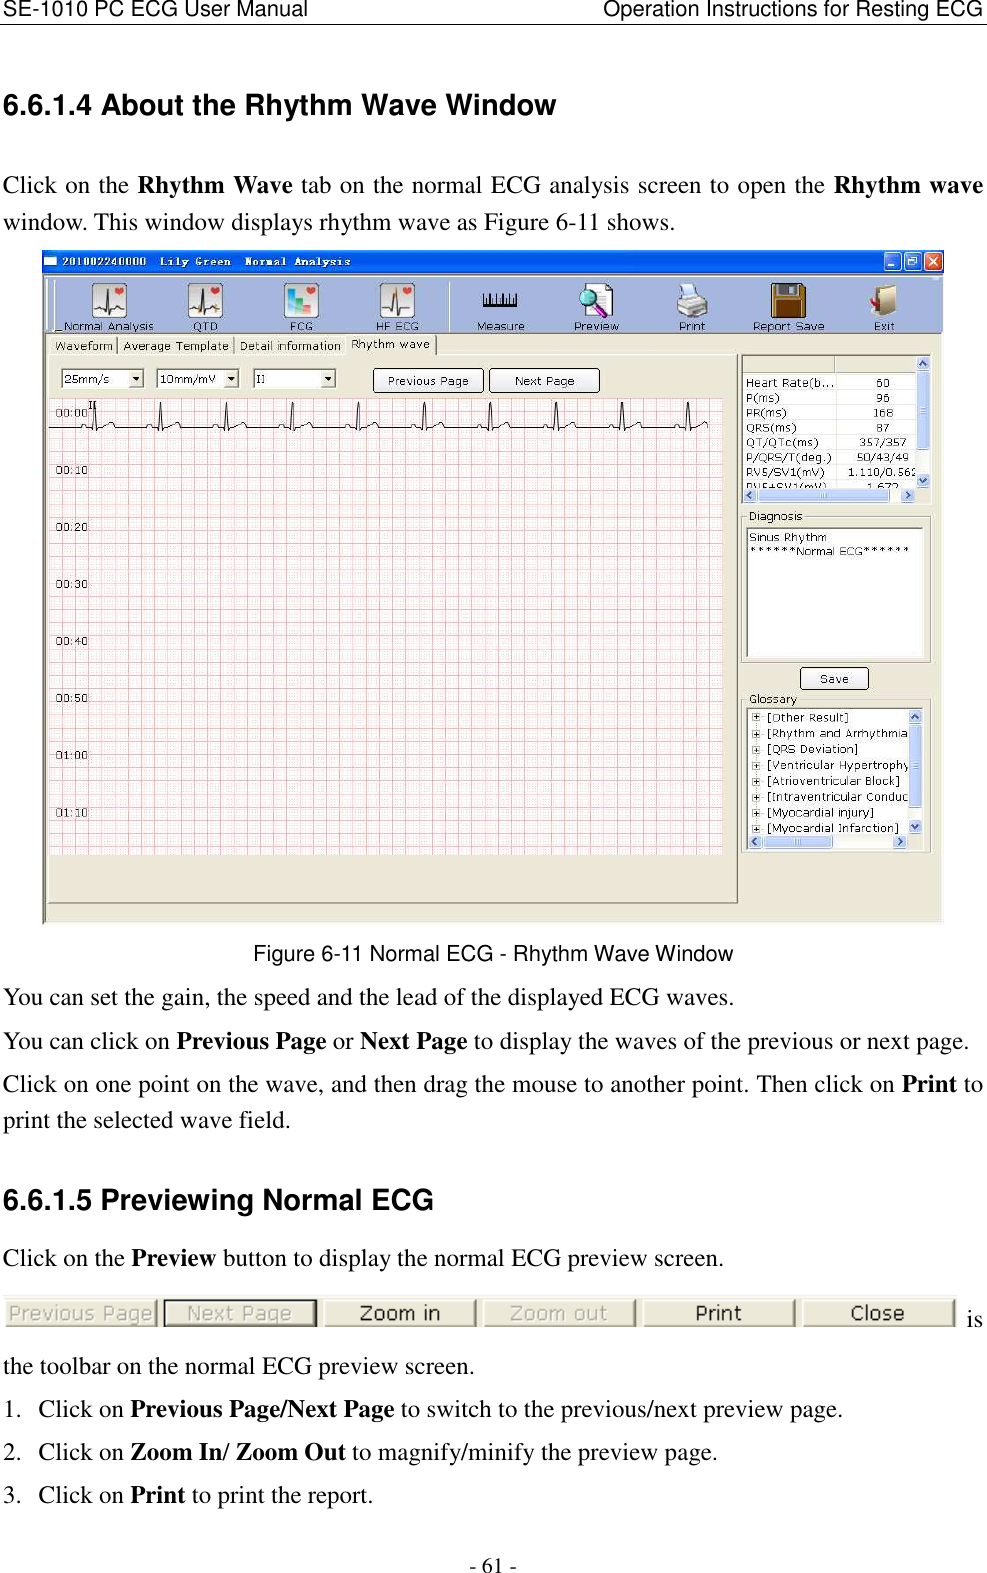 SE-1010 PC ECG User Manual                                                      Operation Instructions for Resting ECG - 61 - 6.6.1.4 About the Rhythm Wave Window Click on the Rhythm Wave tab on the normal ECG analysis screen to open the Rhythm wave window. This window displays rhythm wave as Figure 6-11 shows.  Figure 6-11 Normal ECG - Rhythm Wave Window You can set the gain, the speed and the lead of the displayed ECG waves.   You can click on Previous Page or Next Page to display the waves of the previous or next page. Click on one point on the wave, and then drag the mouse to another point. Then click on Print to print the selected wave field. 6.6.1.5 Previewing Normal ECG Click on the Preview button to display the normal ECG preview screen. is the toolbar on the normal ECG preview screen. 1. Click on Previous Page/Next Page to switch to the previous/next preview page. 2. Click on Zoom In/ Zoom Out to magnify/minify the preview page. 3. Click on Print to print the report. 